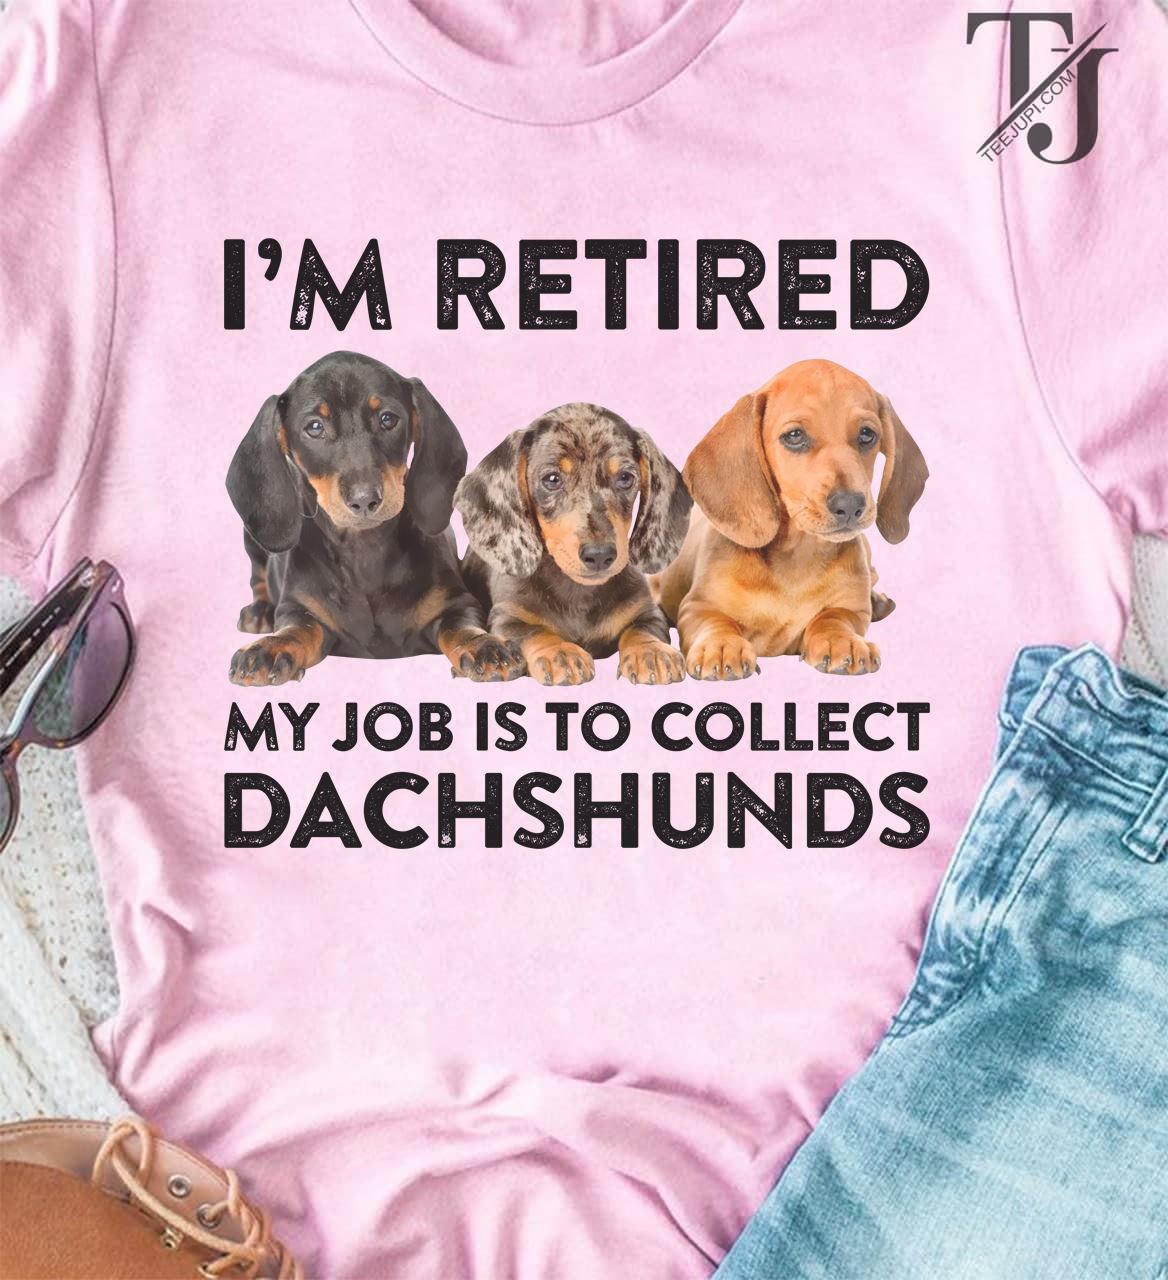 I'm retired My job is to collect Dachshunds - Dachshunds dog